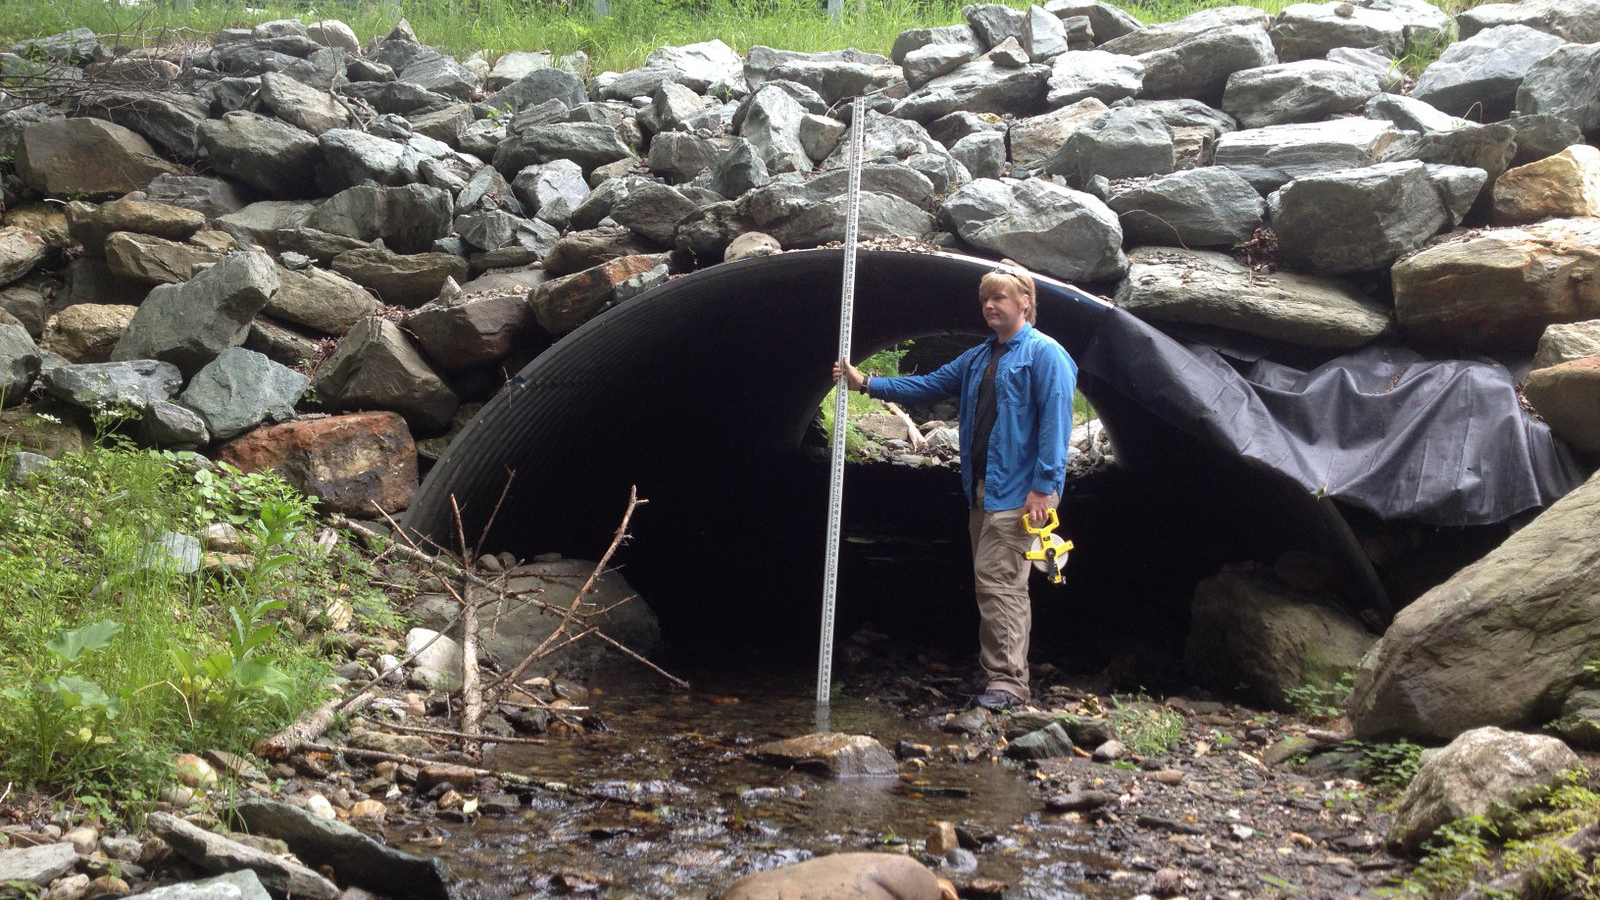 This culvert was built using a technique developed by the Forest Service called "Stream Simulation" after the previous culvert blew out during Tropical Storm Irene. Photo © White River Partnership